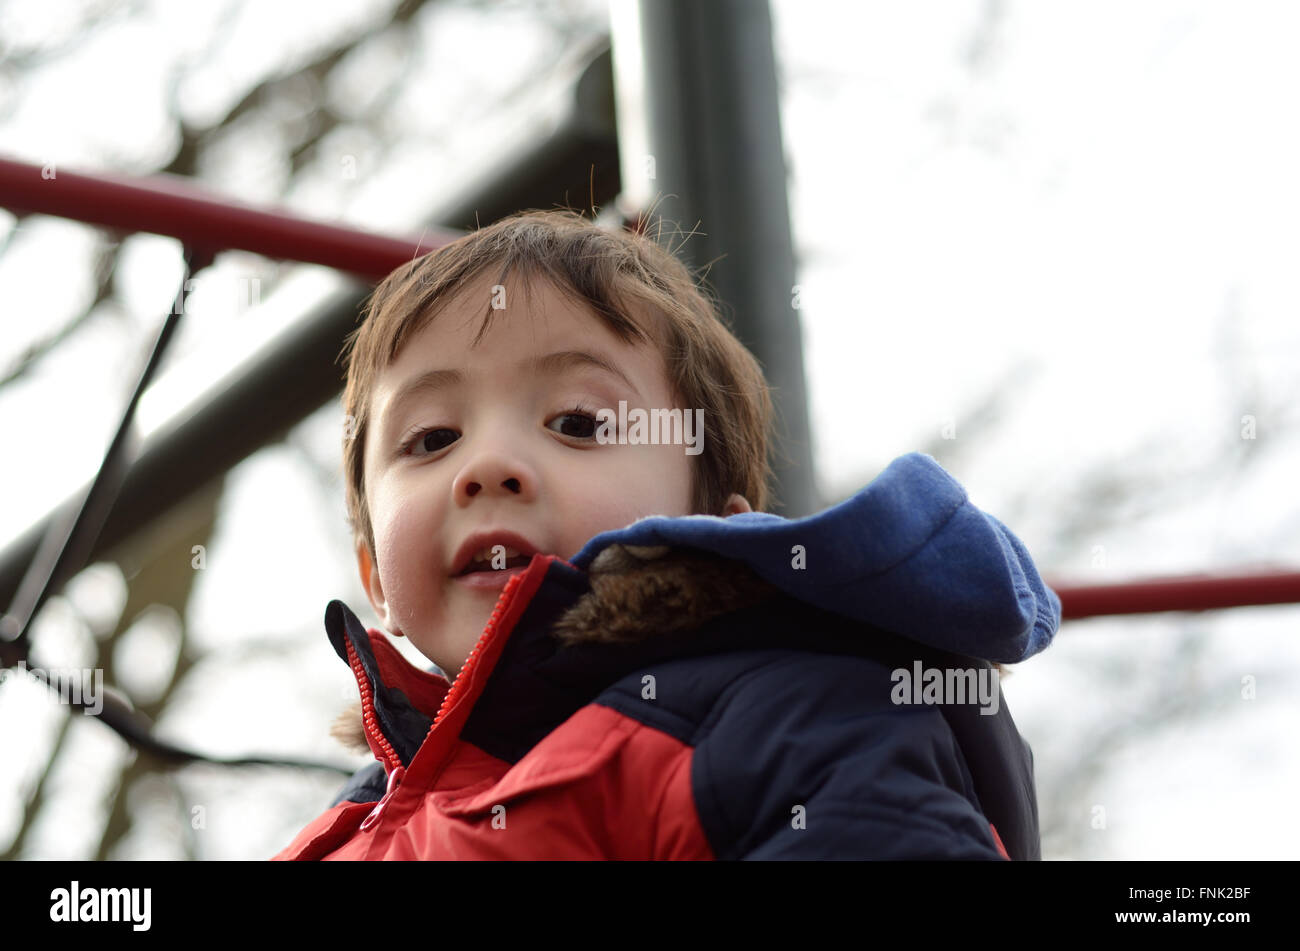 Looking up at a young boy who's standing on a climbing frame in the park Stock Photo